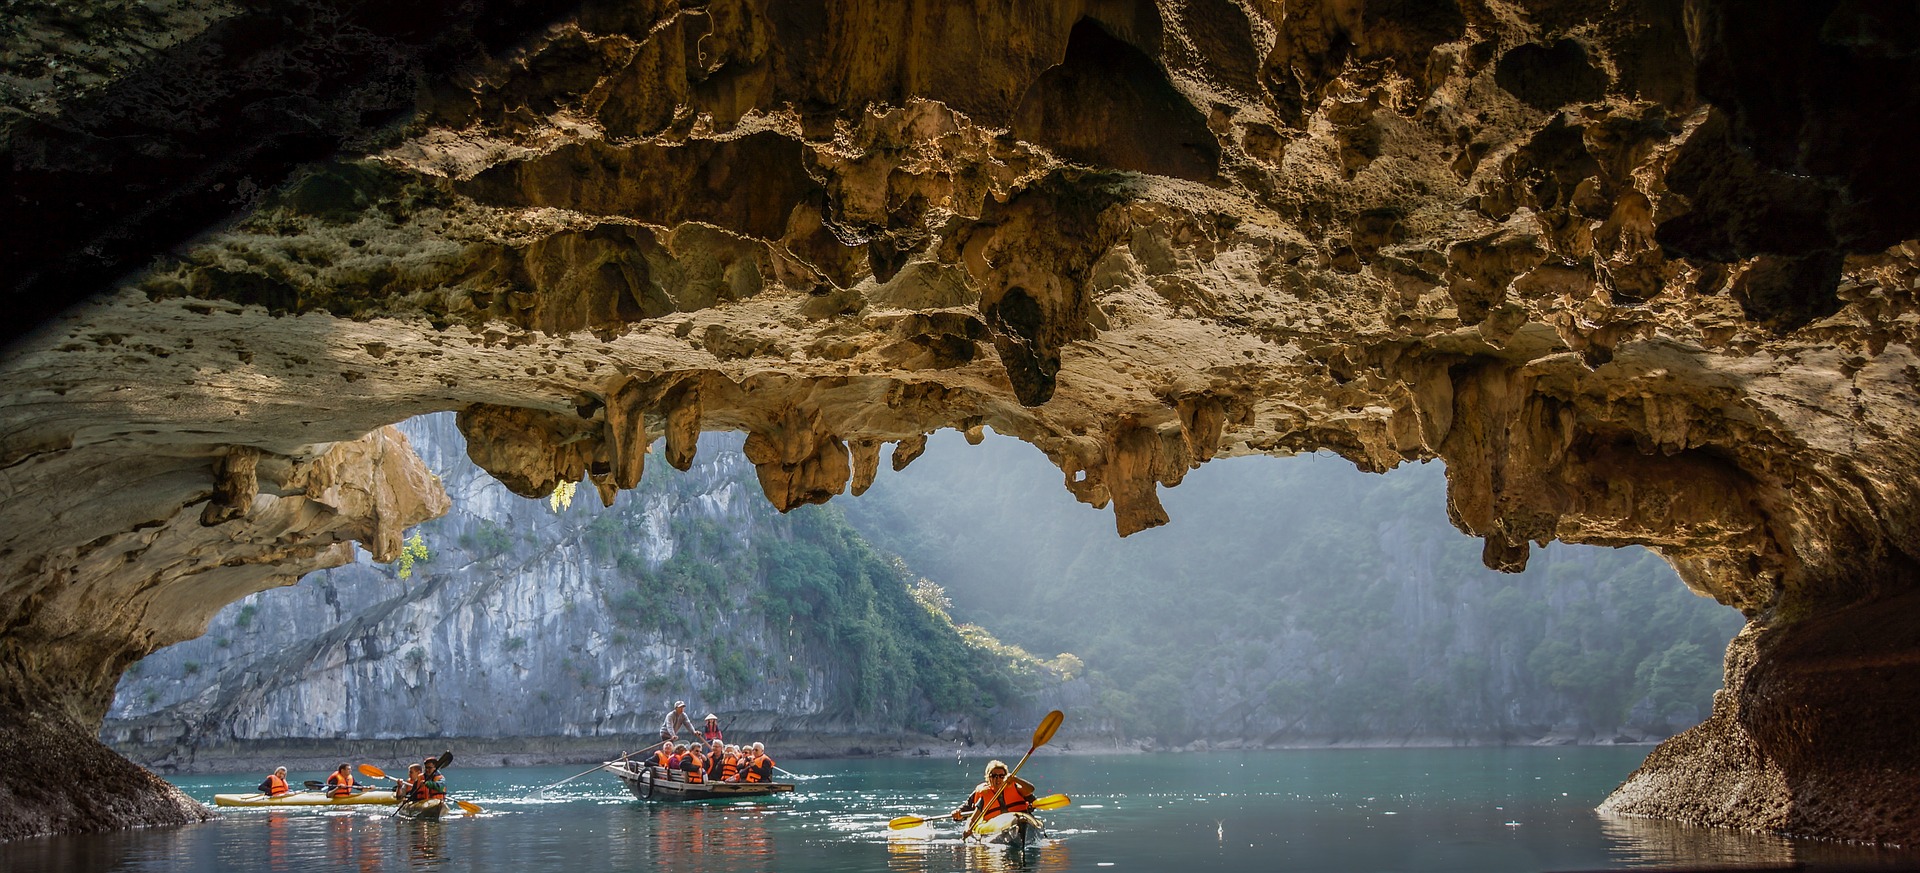 October is the best month to visit Halong bay